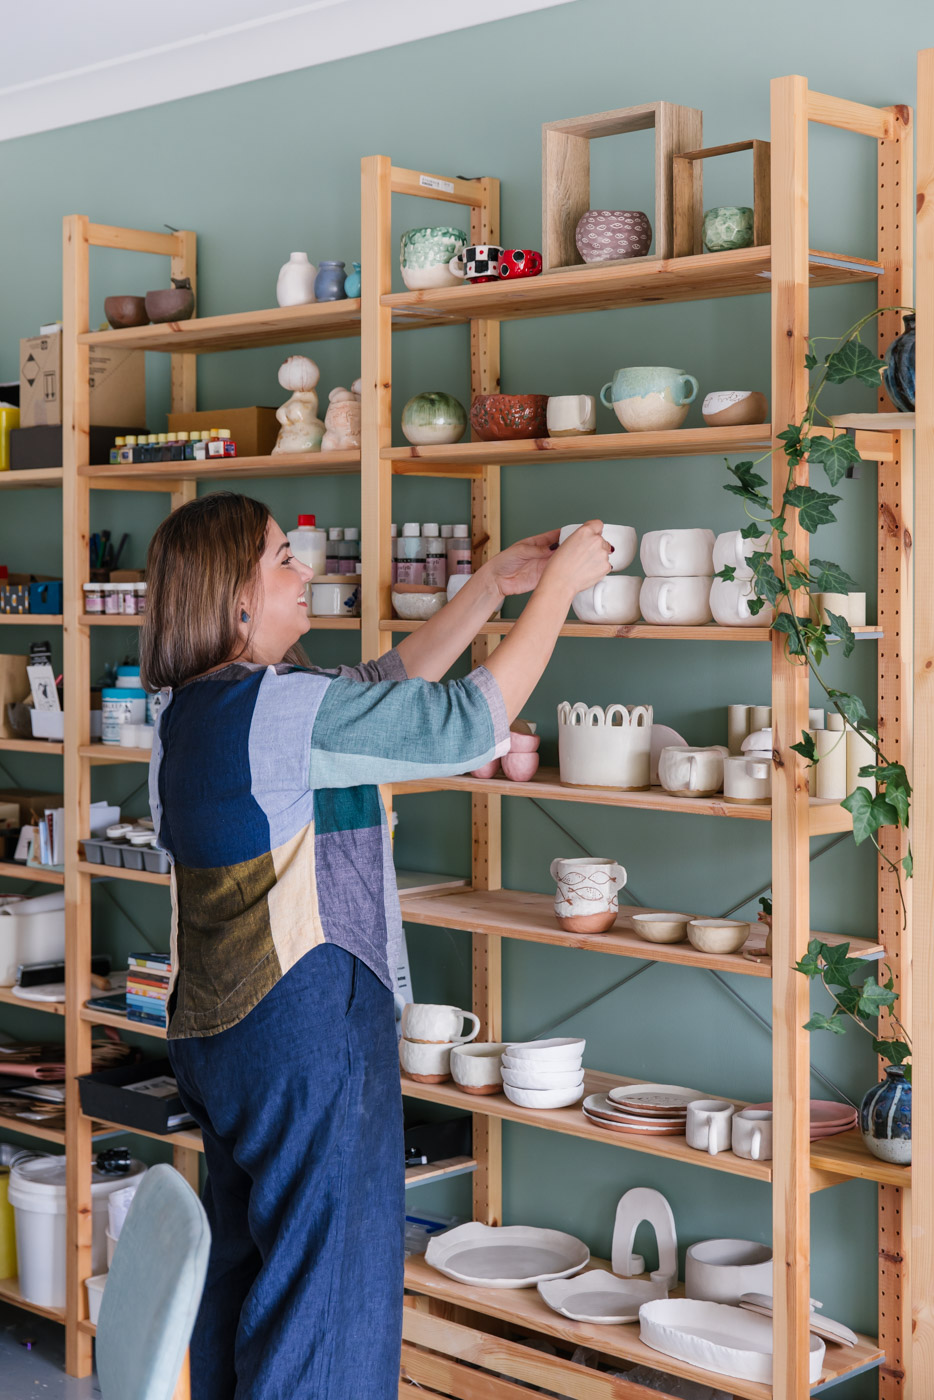 Soraya sorts the shelves of ceramic bisque fired pieces in her home studio